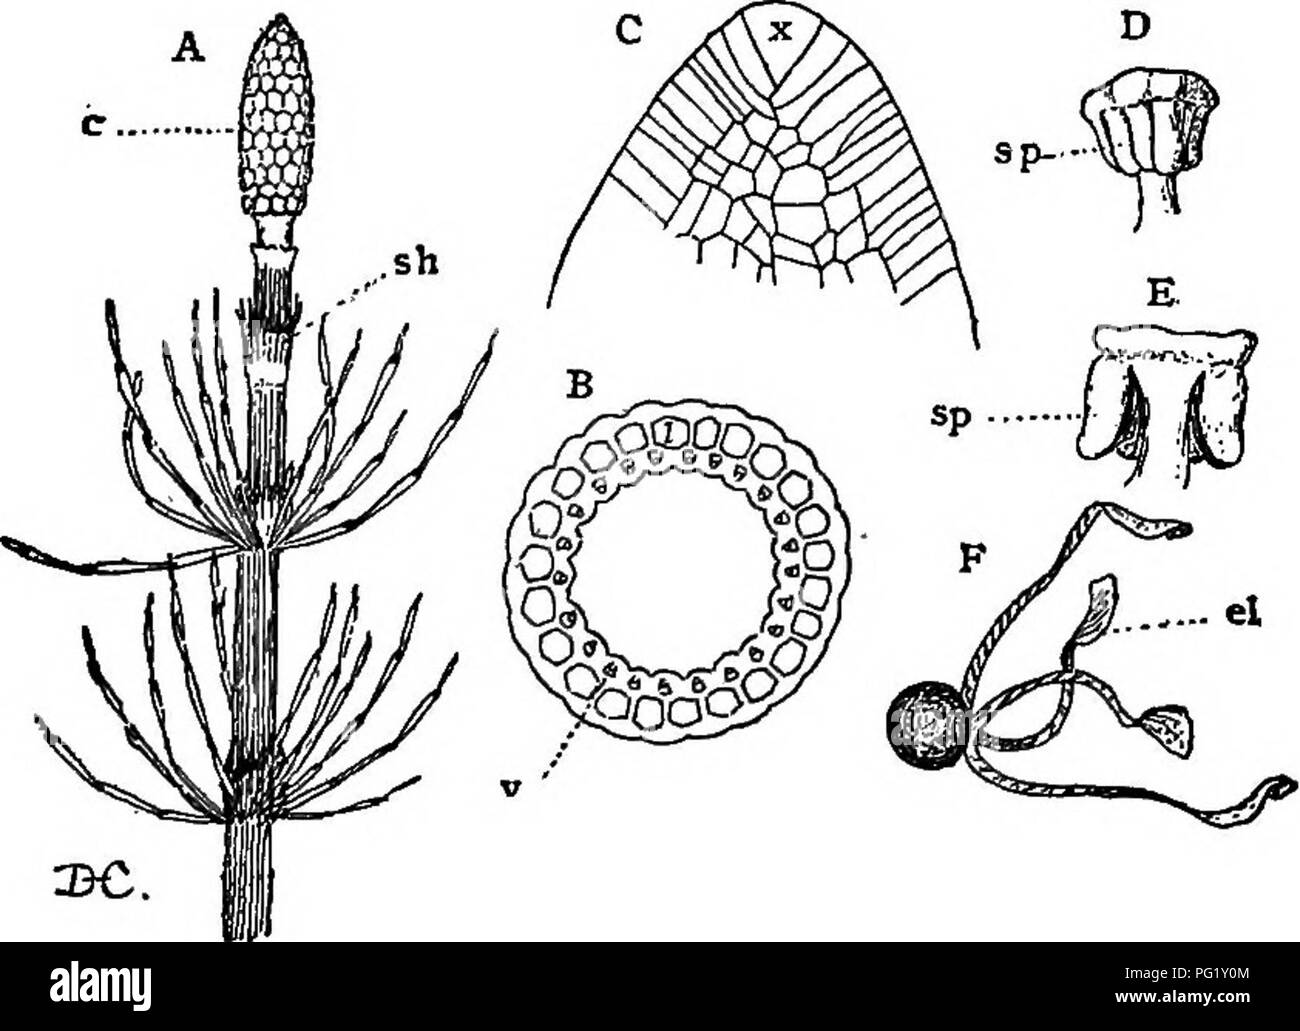 . Lectures on the evolution of plants. Botany; Plants. 140 EVOLUTION OF PLAJTTS except for the conspicuous lobes referred to above. The reproductive organs are very much like those of the eusporangiate ferns, and the spermatozoids, which are large and multiciliate, closely resemble those of Osmunda.. Fig. 36 (EquisetinesS). — A, upper part of a sporiferous shoot of ahorse- tail {Equisetum pratense), showing the division into nodes and inter- nodes, the rudimentary sheath-leaves, sh, and the strobilus or cone of sporophylls, c; B, a cross-section of an internode of M. maximum, showing the arran Stock Photo